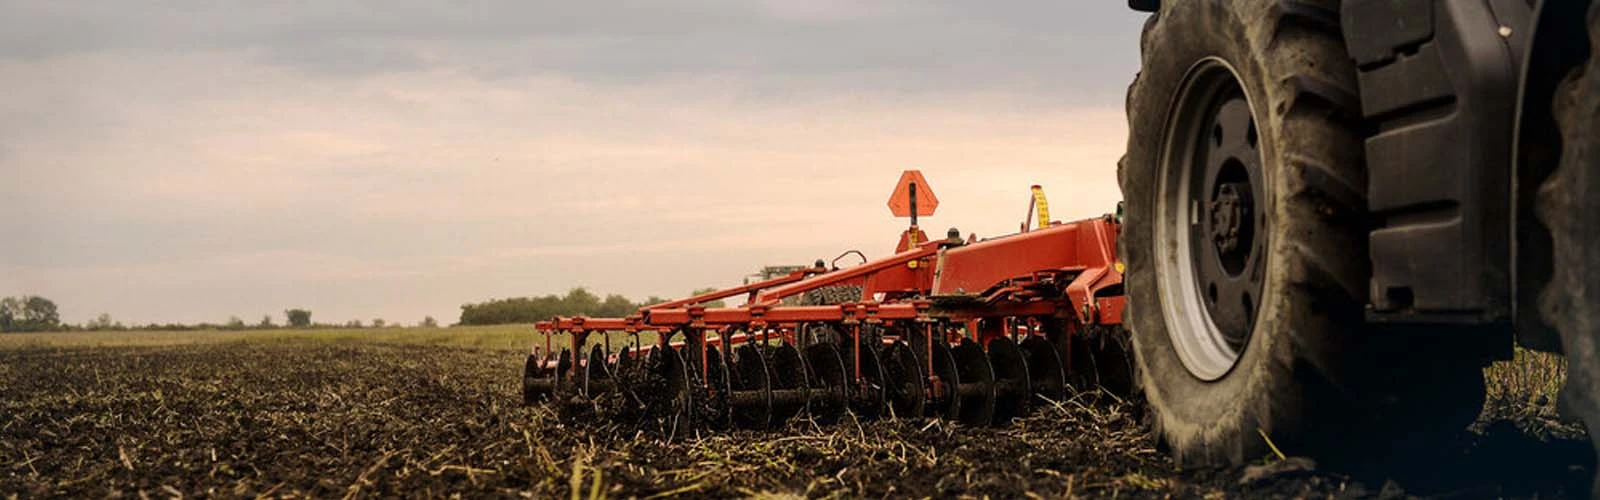 Maximizing Crop Yield with Tractor Implements